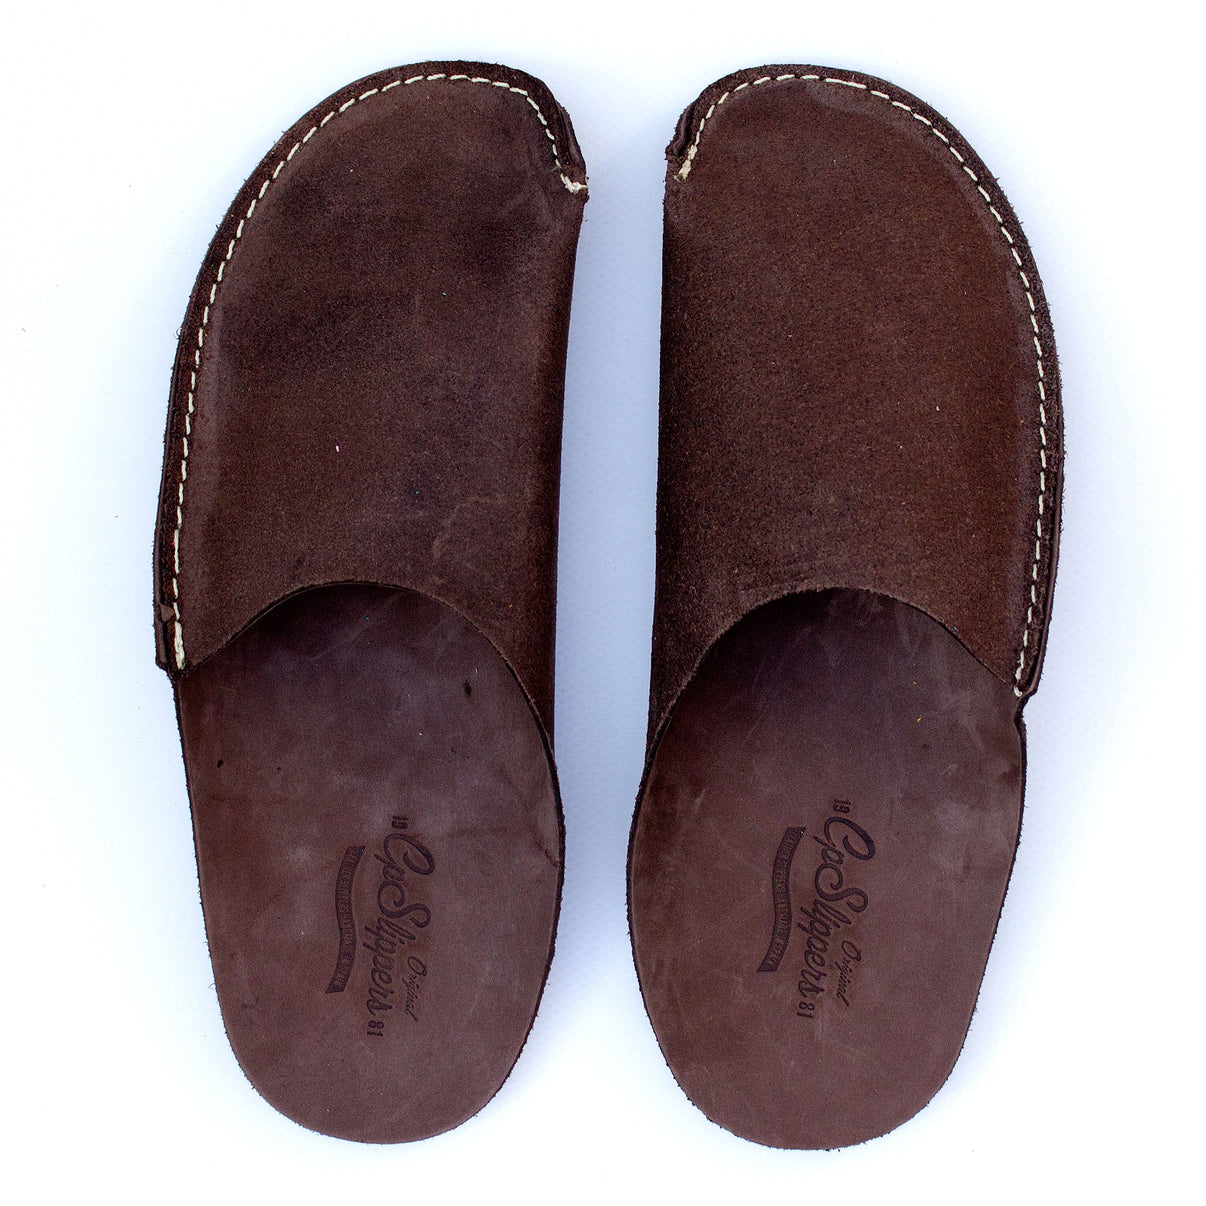 Brown Leather Slippers for Men and Women by CP Slippers Minimalist